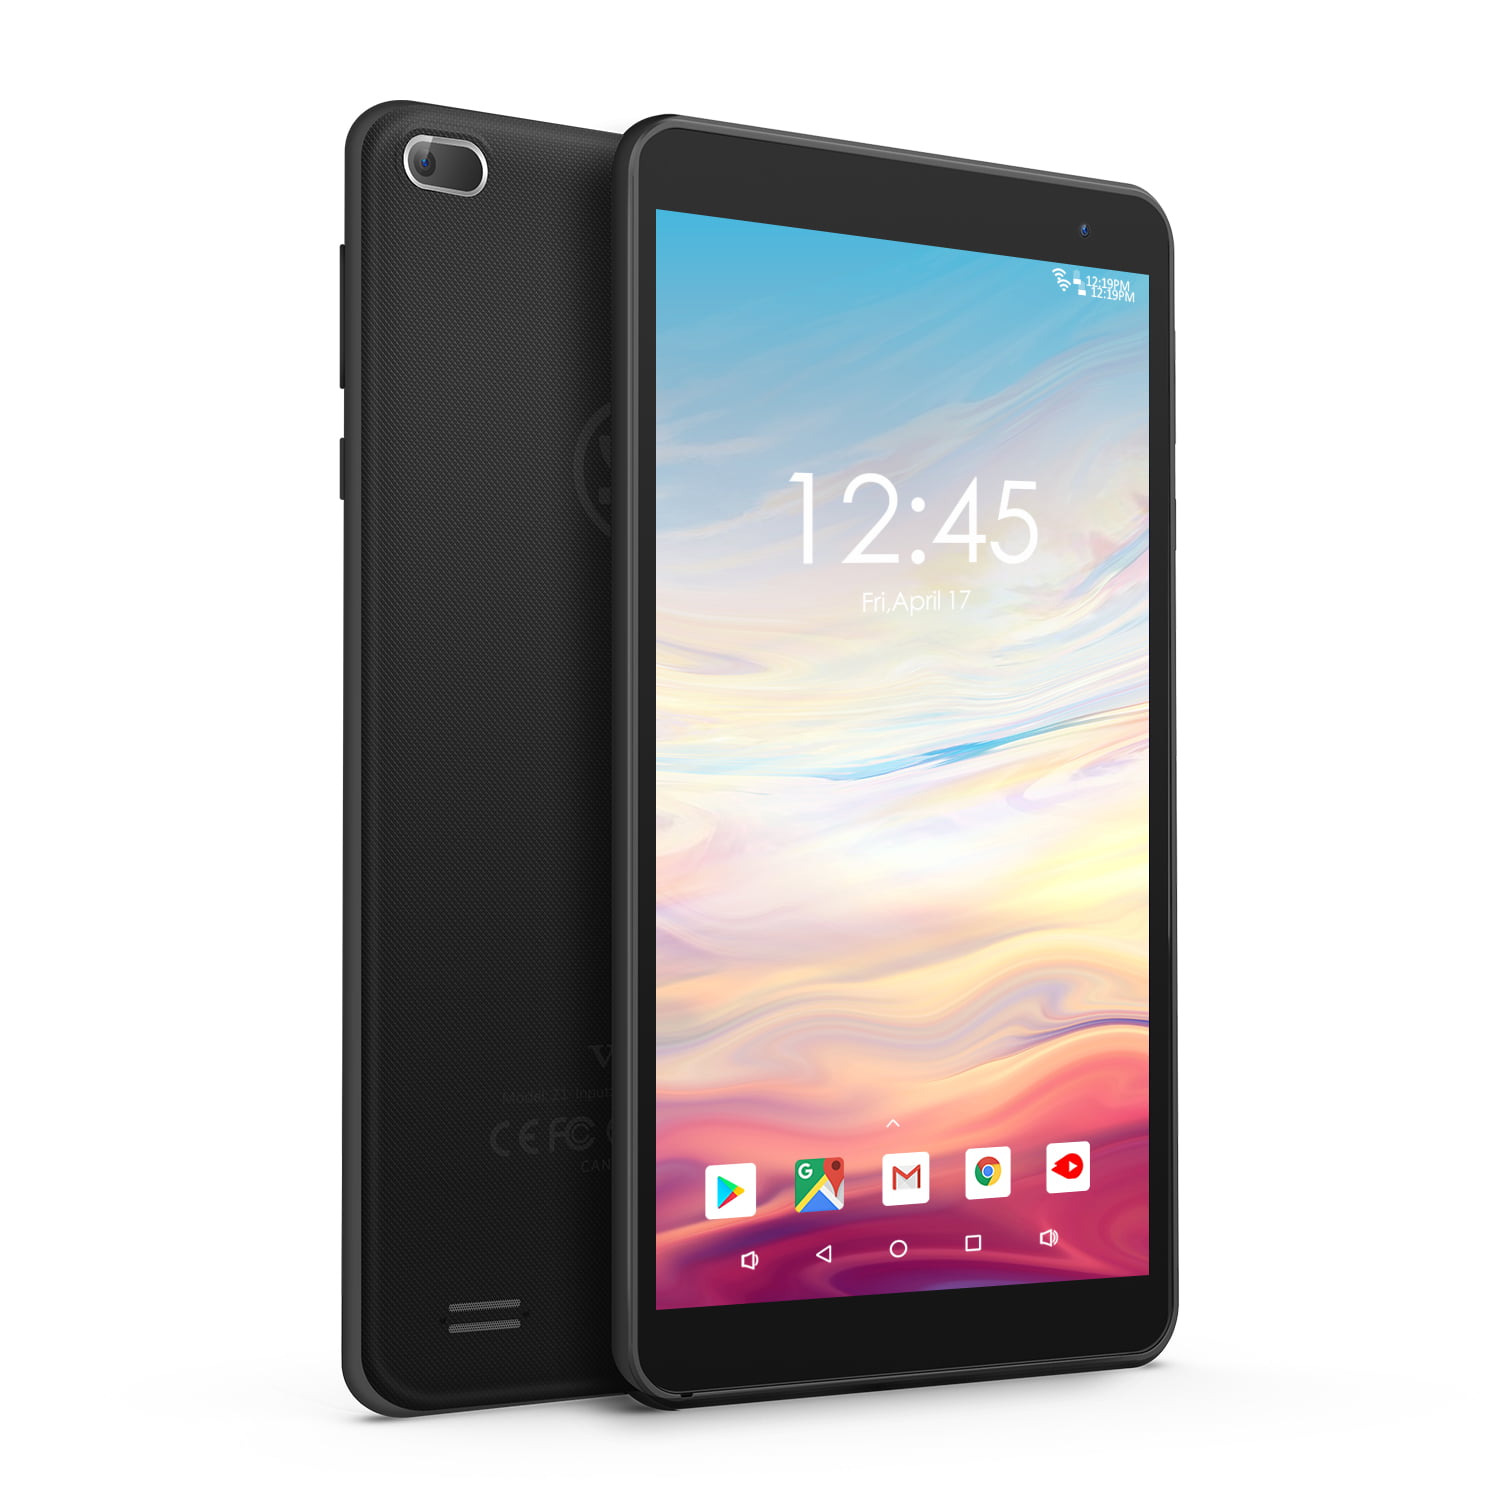 Vankyo MatrixPad Z1 7 inch tablet, Android 10.0 Operating System, 32GB Storage, Quad-core